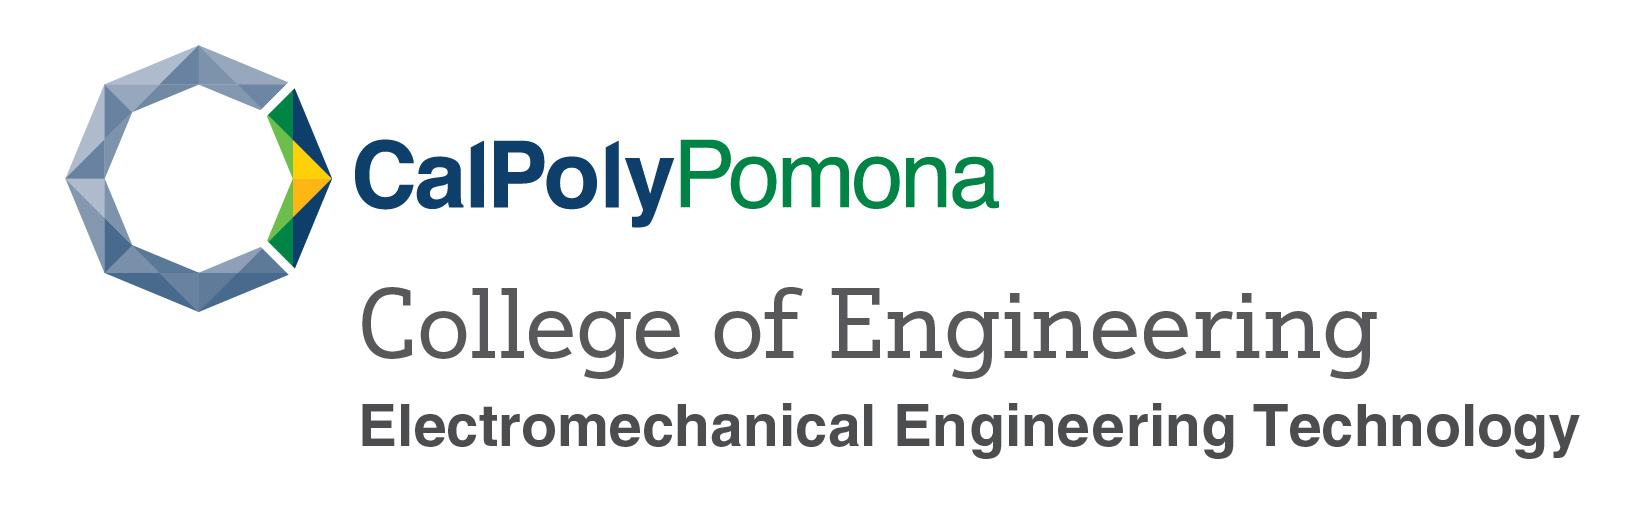 Cal Poly Pomona College of Engineering Electromechanical Engineering Technology